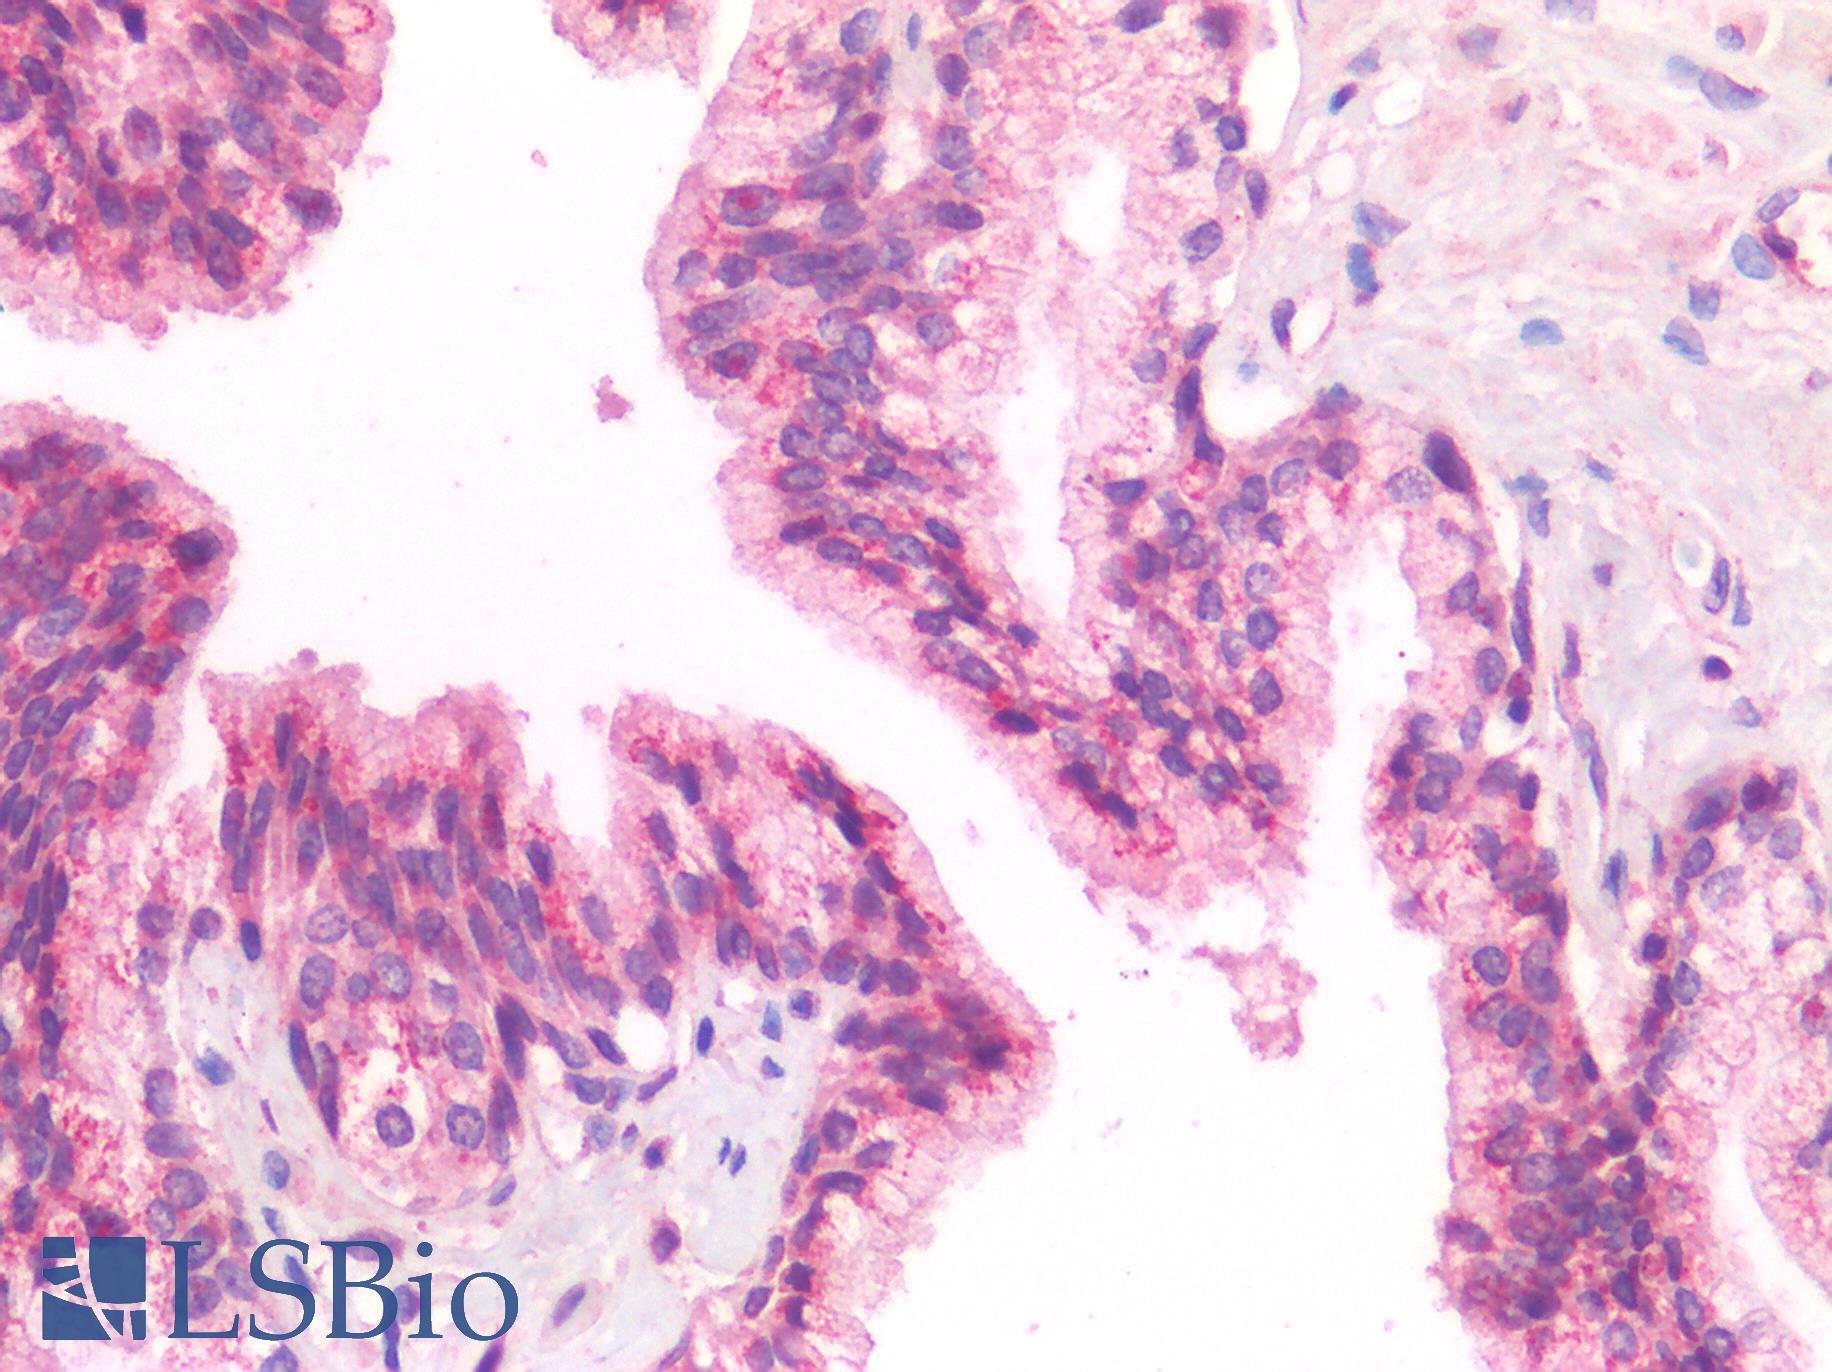 IL-33 Antibody - Human Prostate: Formalin-Fixed, Paraffin-Embedded (FFPE)